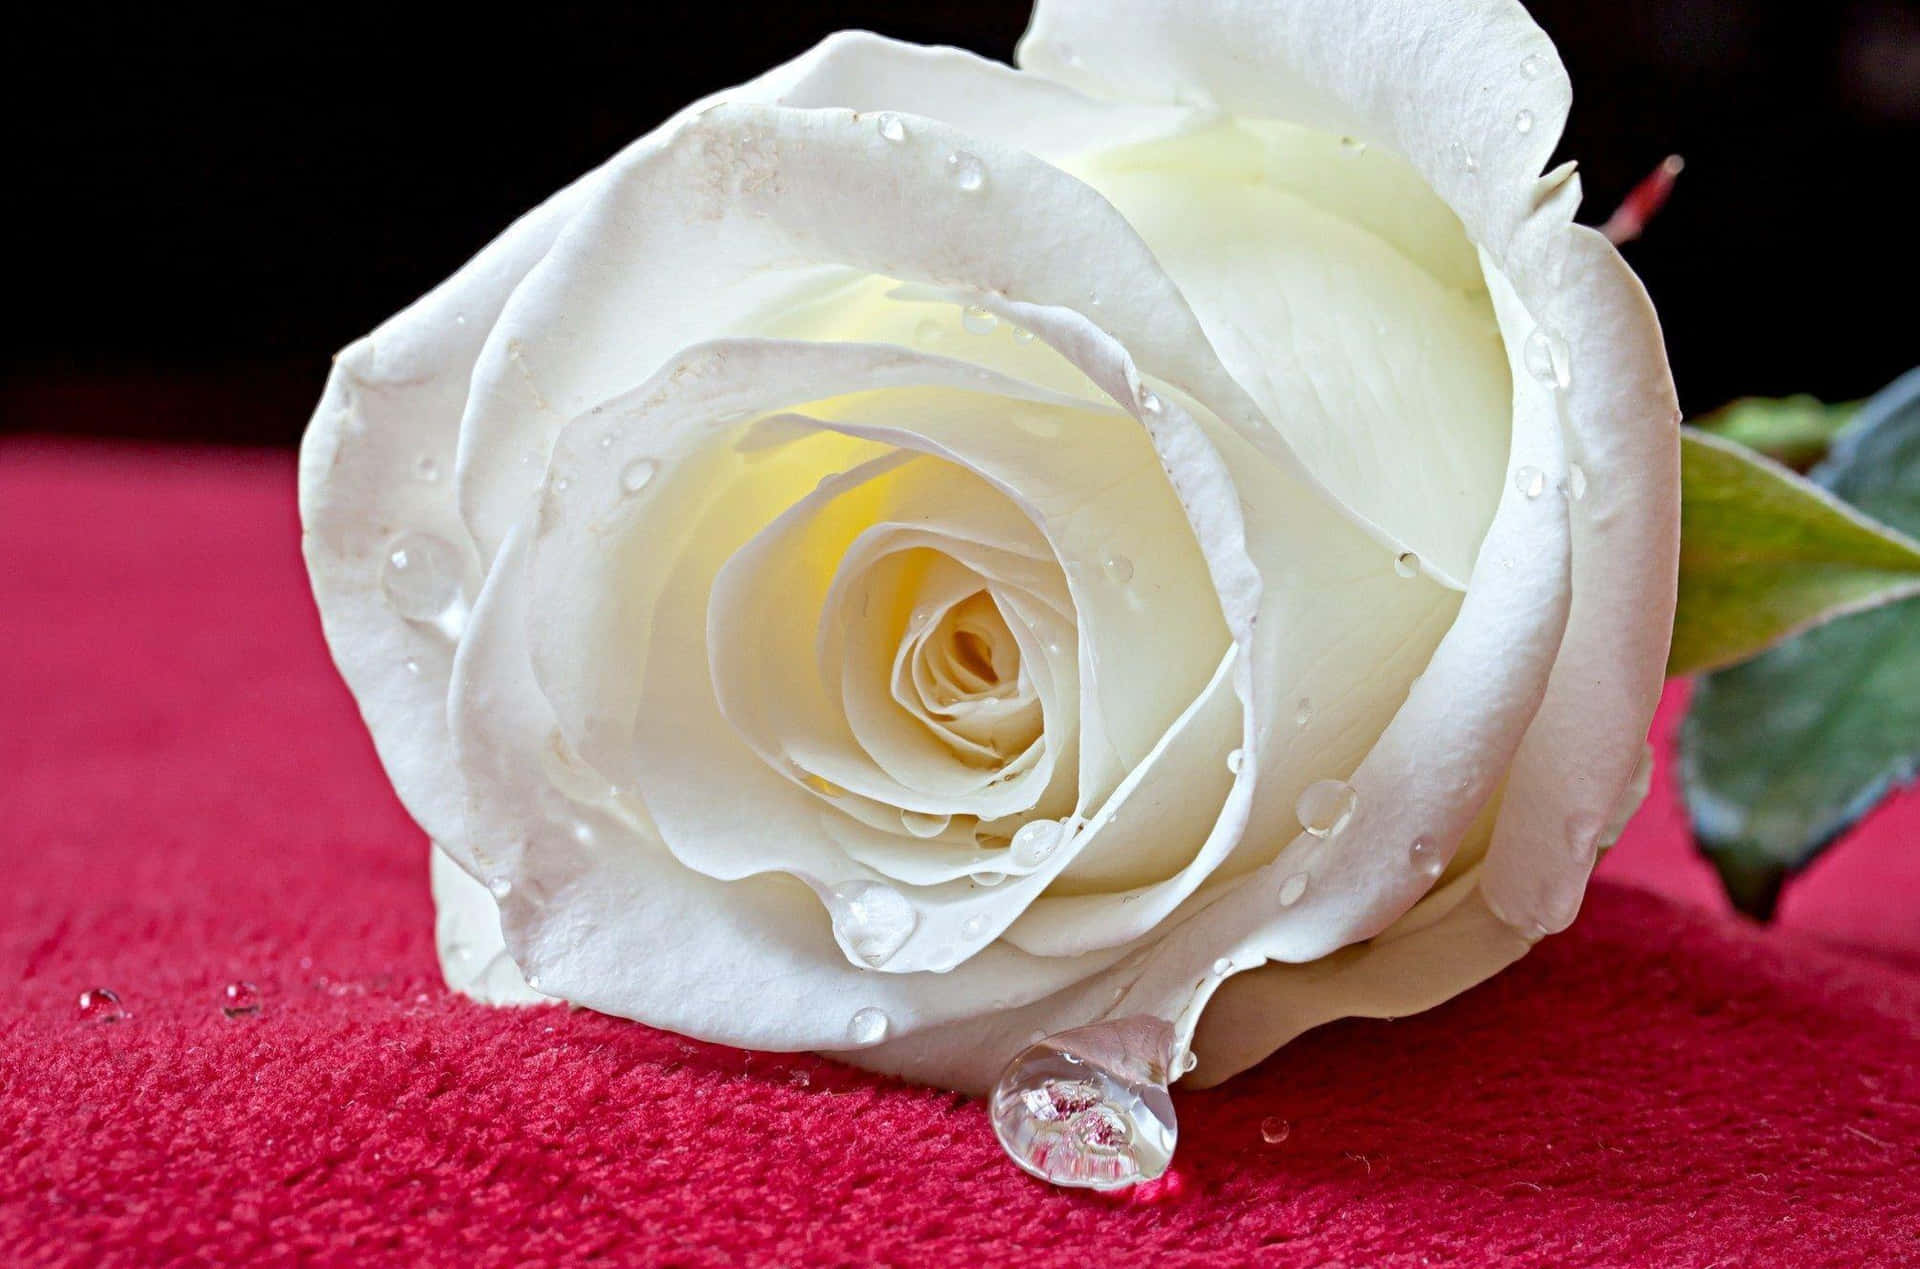 A White Rose On A Red Cloth Wallpaper